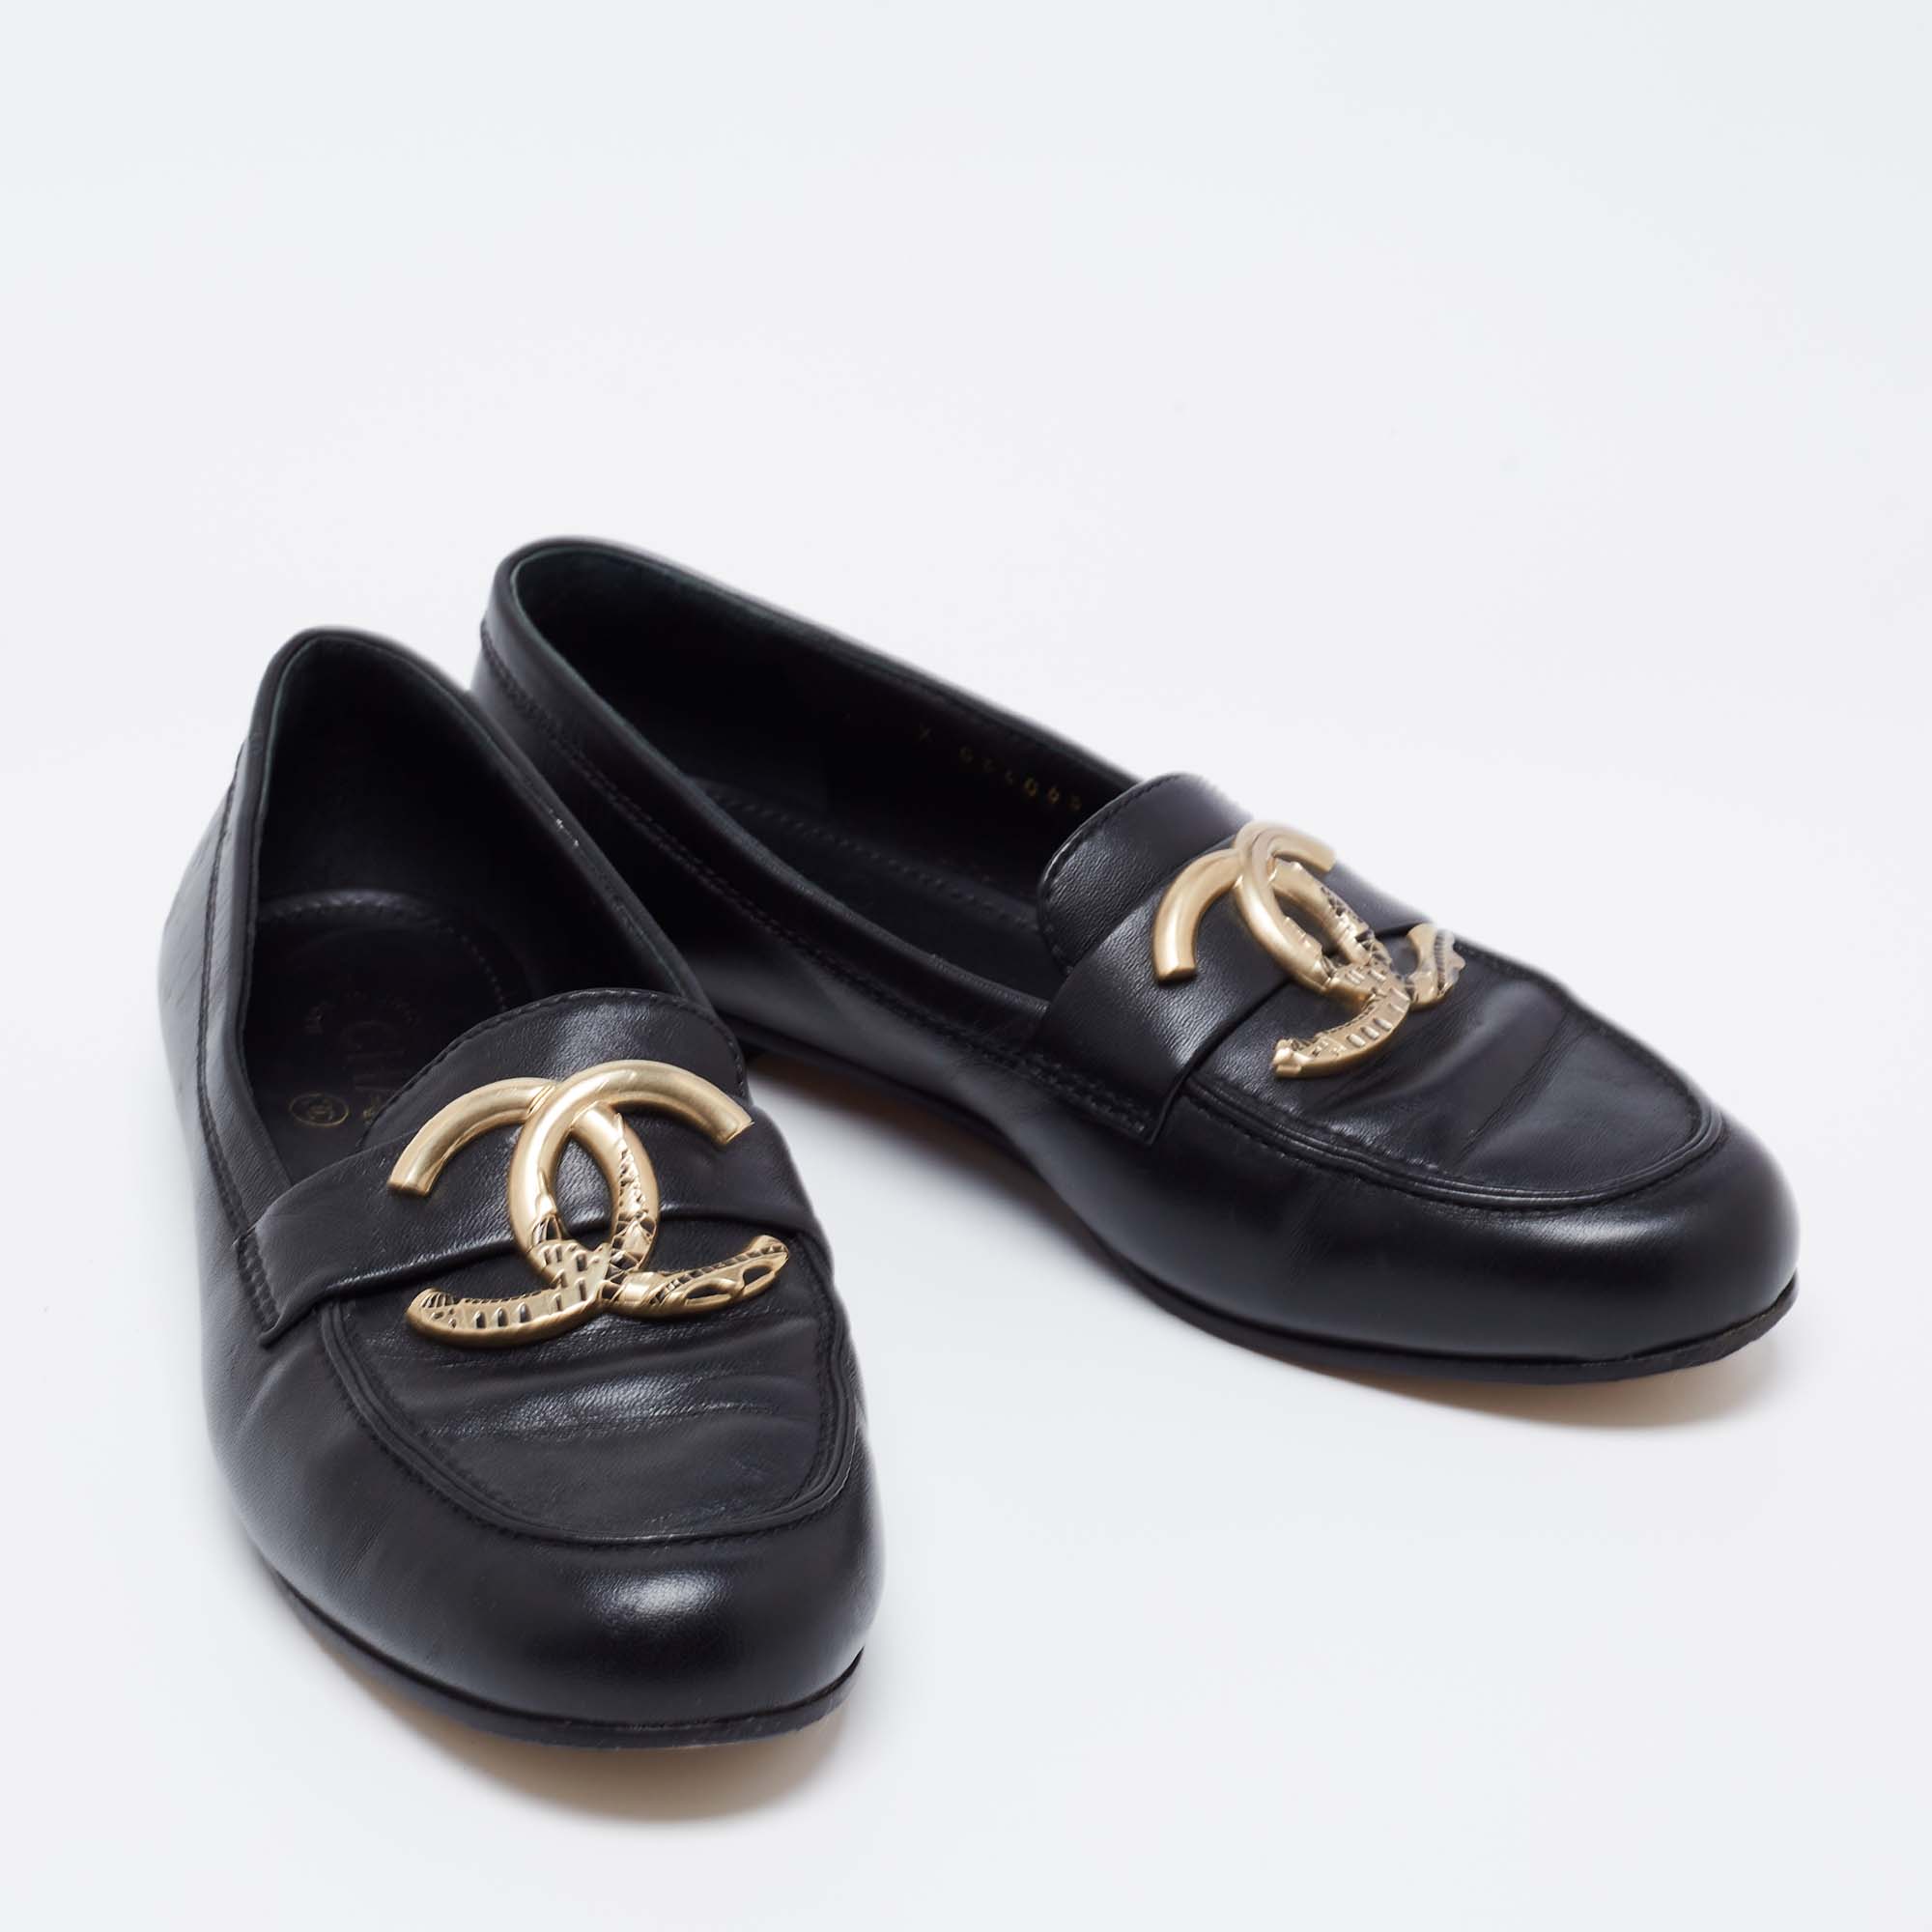 Chanel Black Leather Metal CC Slip On Loafers Size 38.5